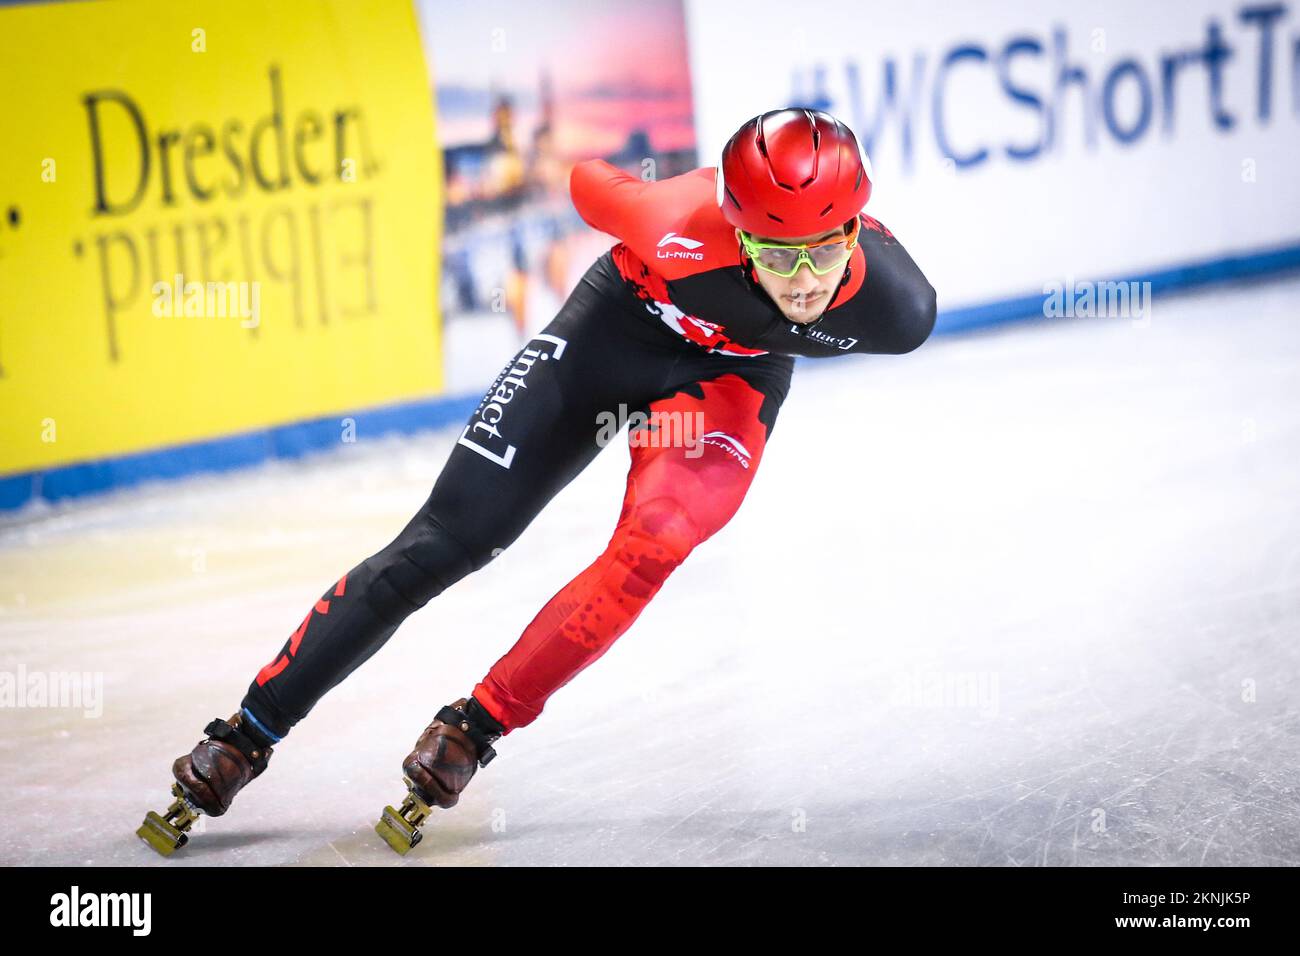 Dresden, Germany, February 02, 2019: male speed skater Samuel Girard of Canada competes during the ISU Short Track Speed Skating World Championships Stock Photo